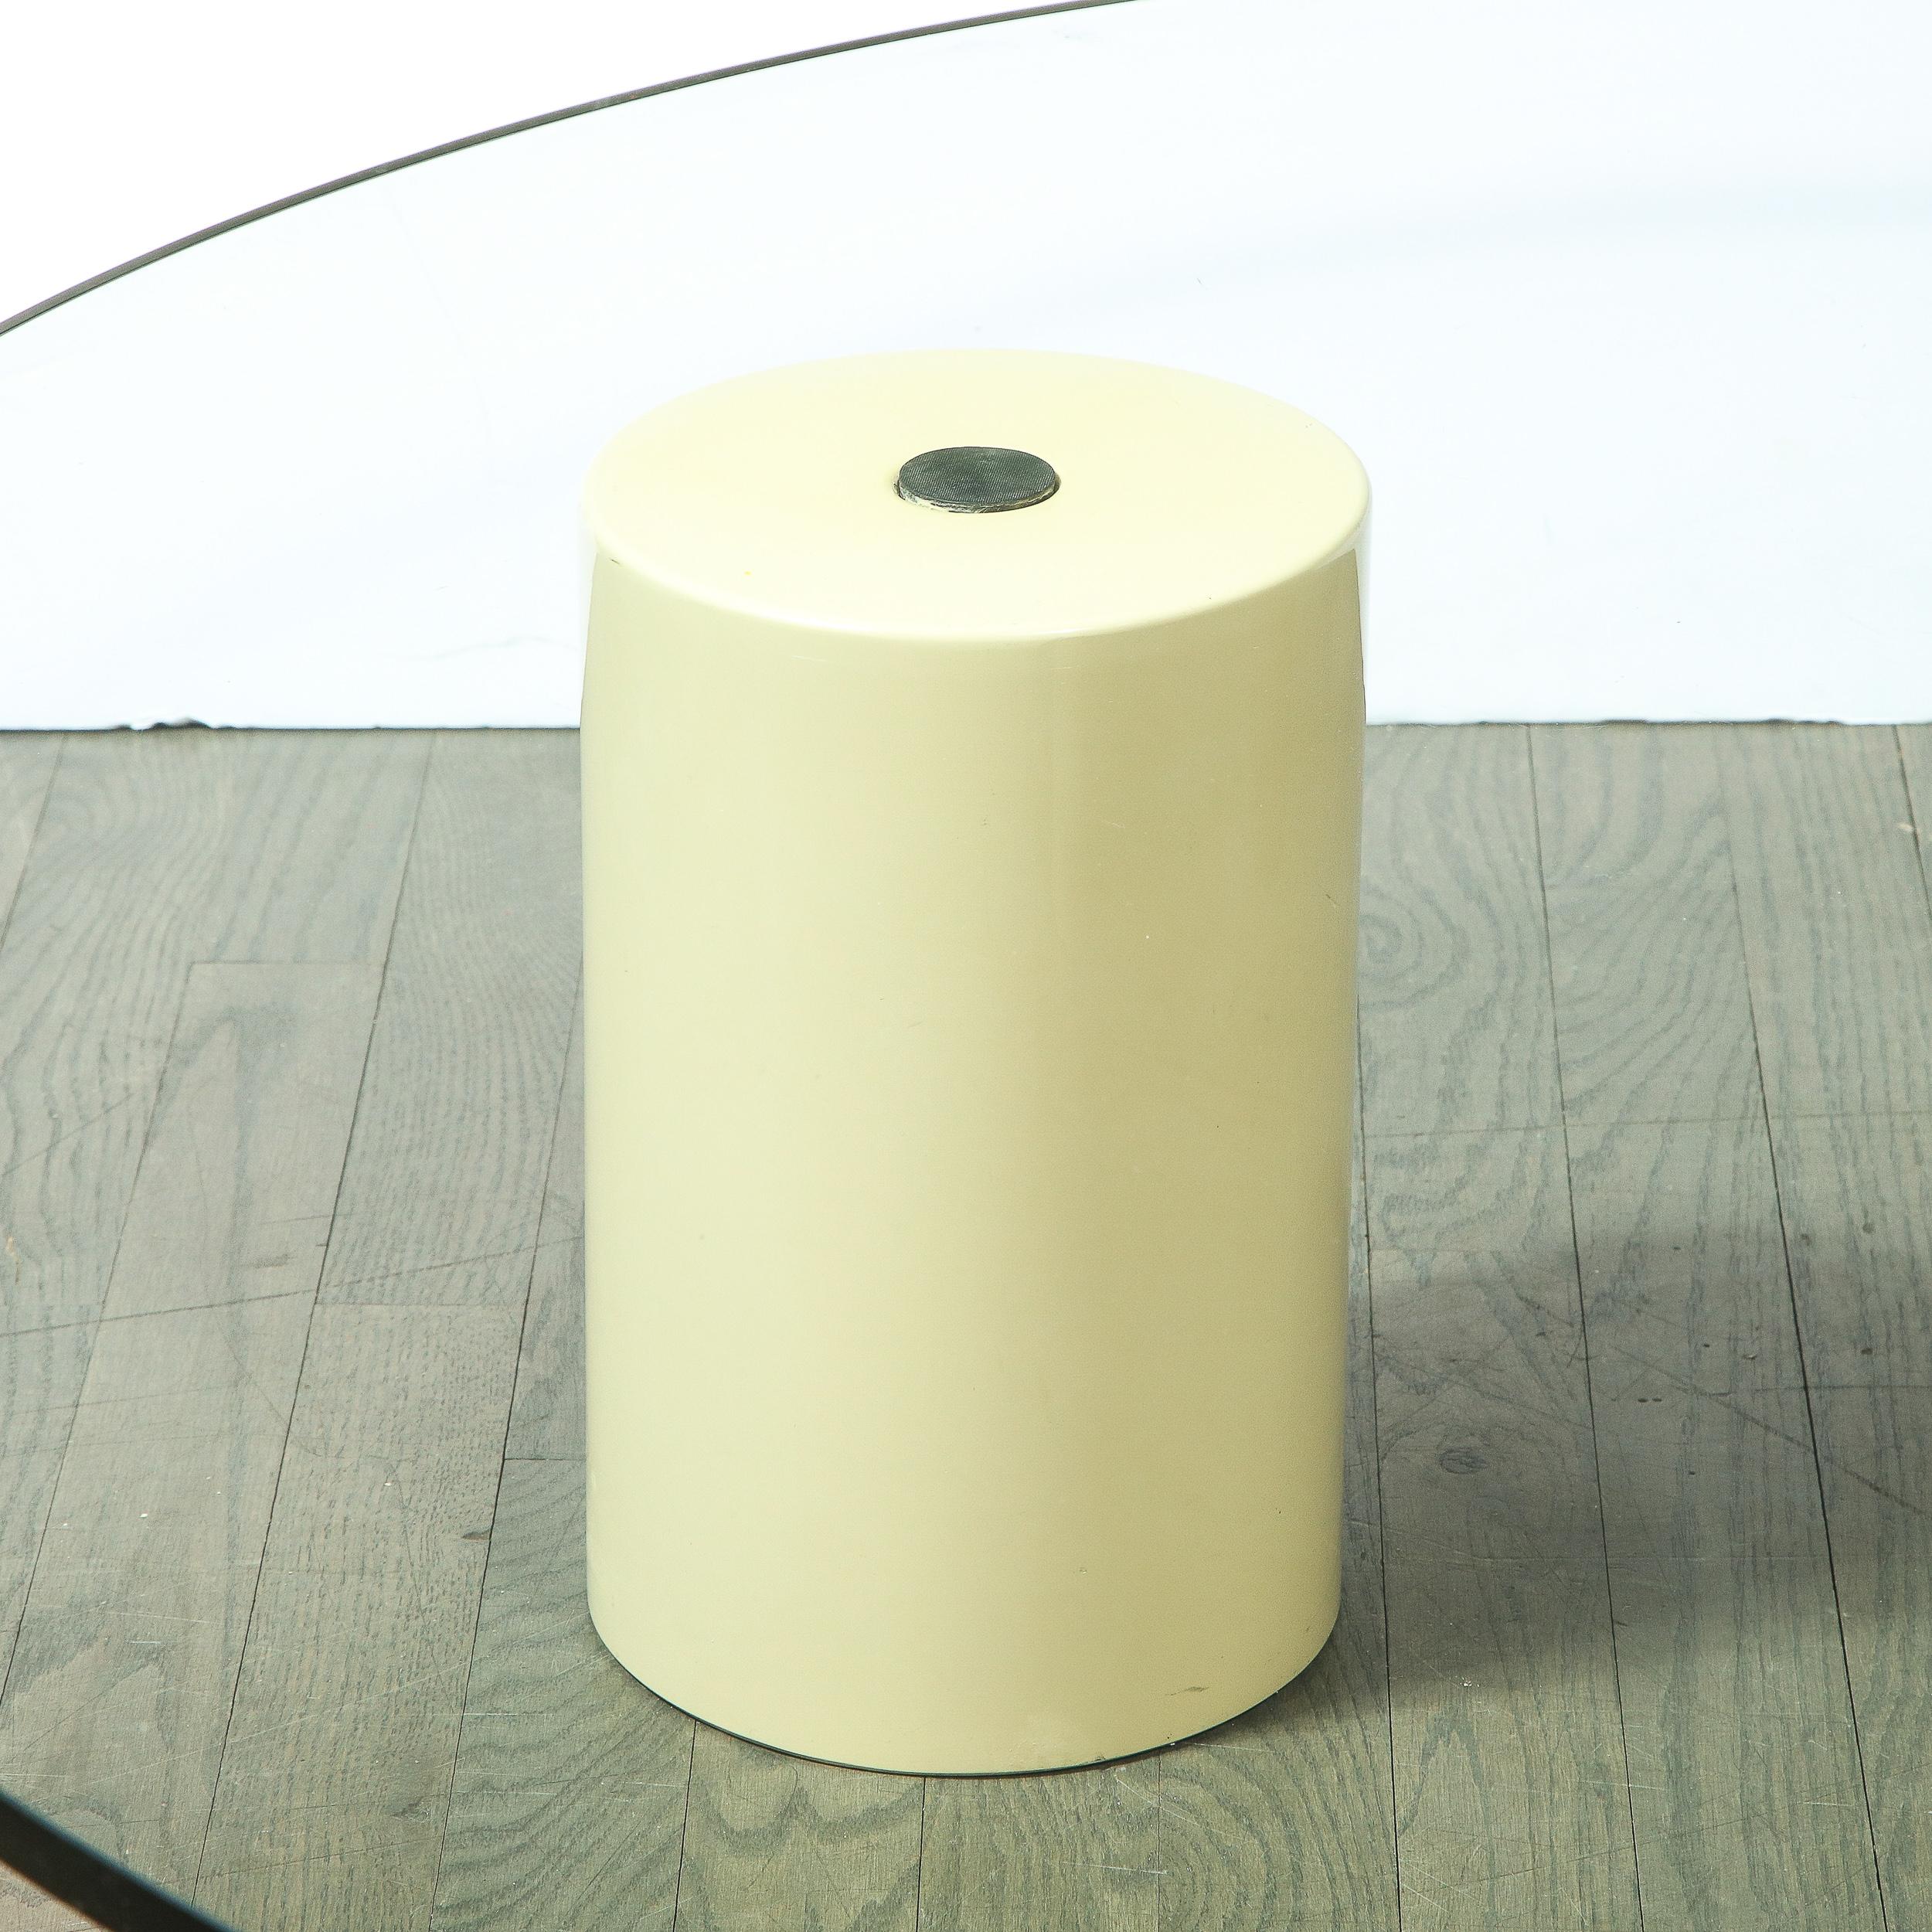 Late 20th Century Modernist Cream and Ochre Enamel Pillar Cocktail Table by Saporiti For Sale